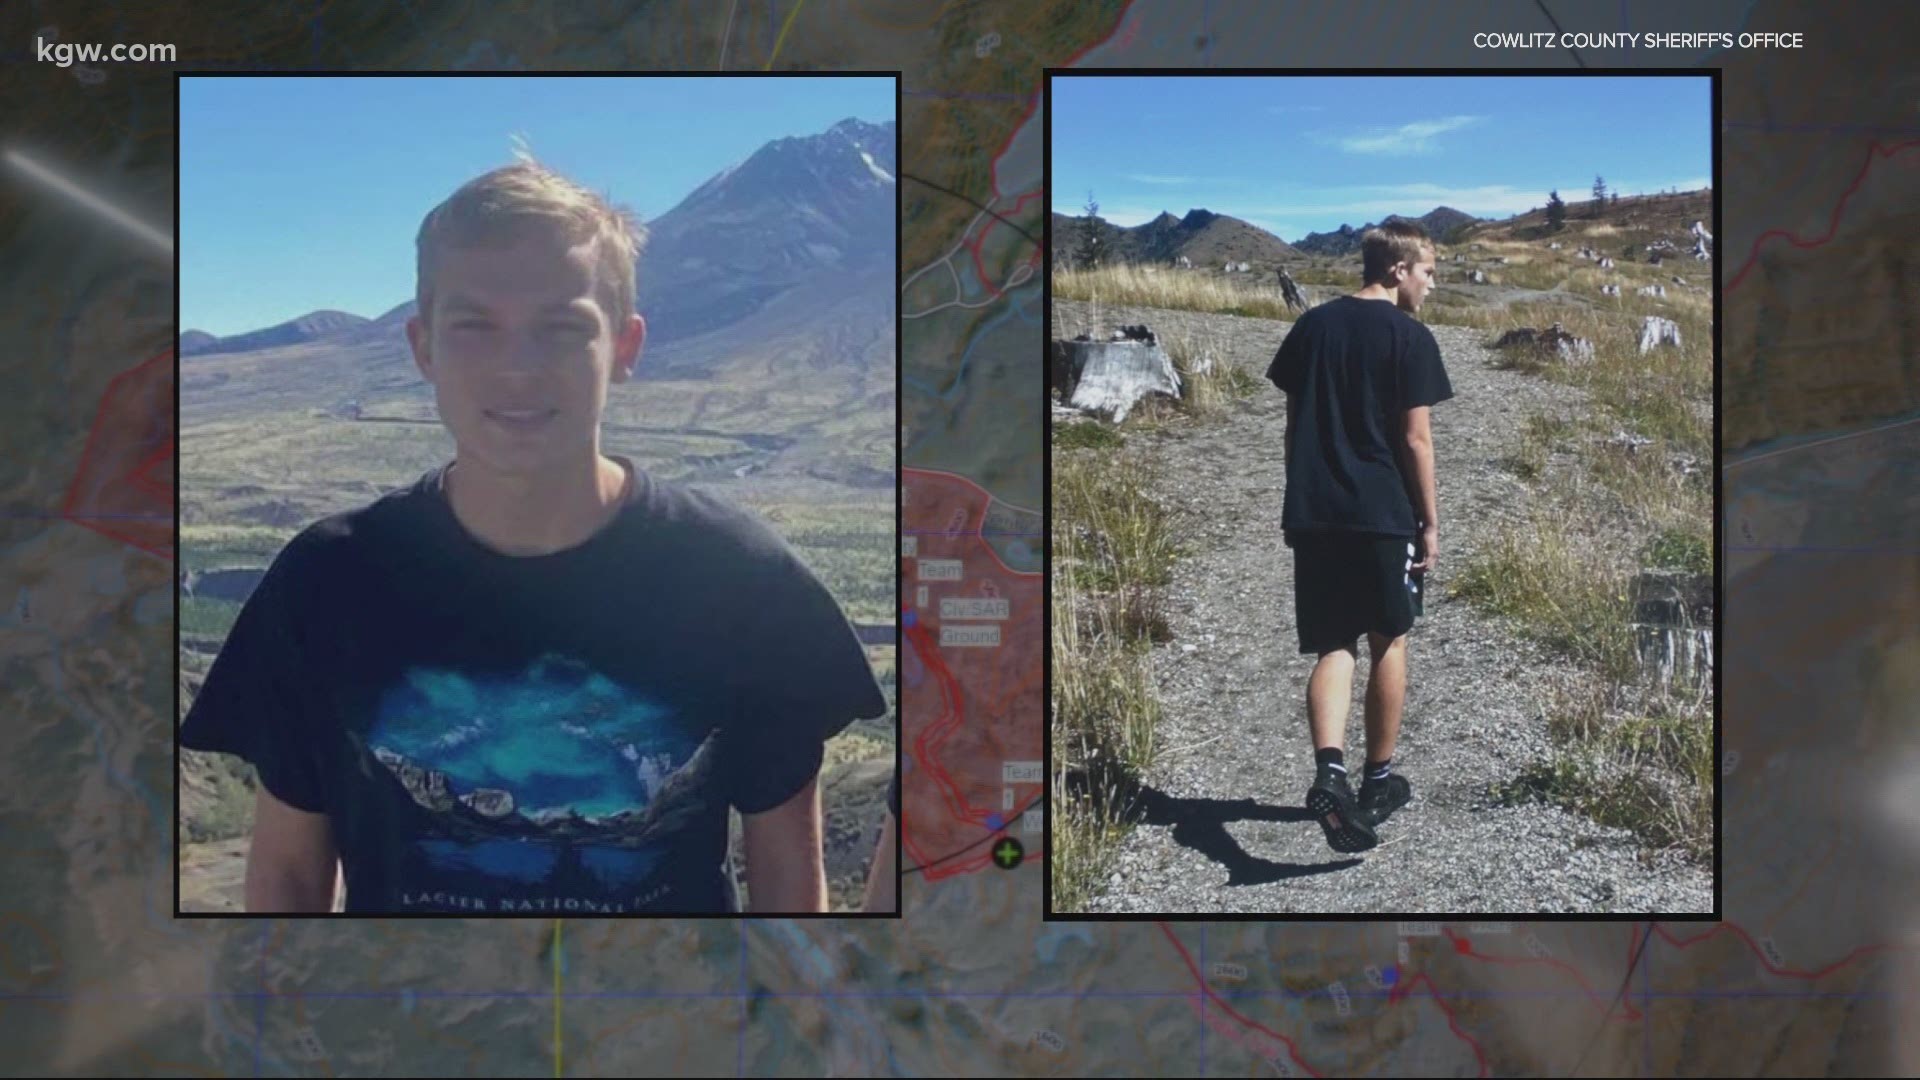 Authorities said Anthony Mancuso had been hiking with his family Sunday and vanished after leaving the trail to use a restroom.